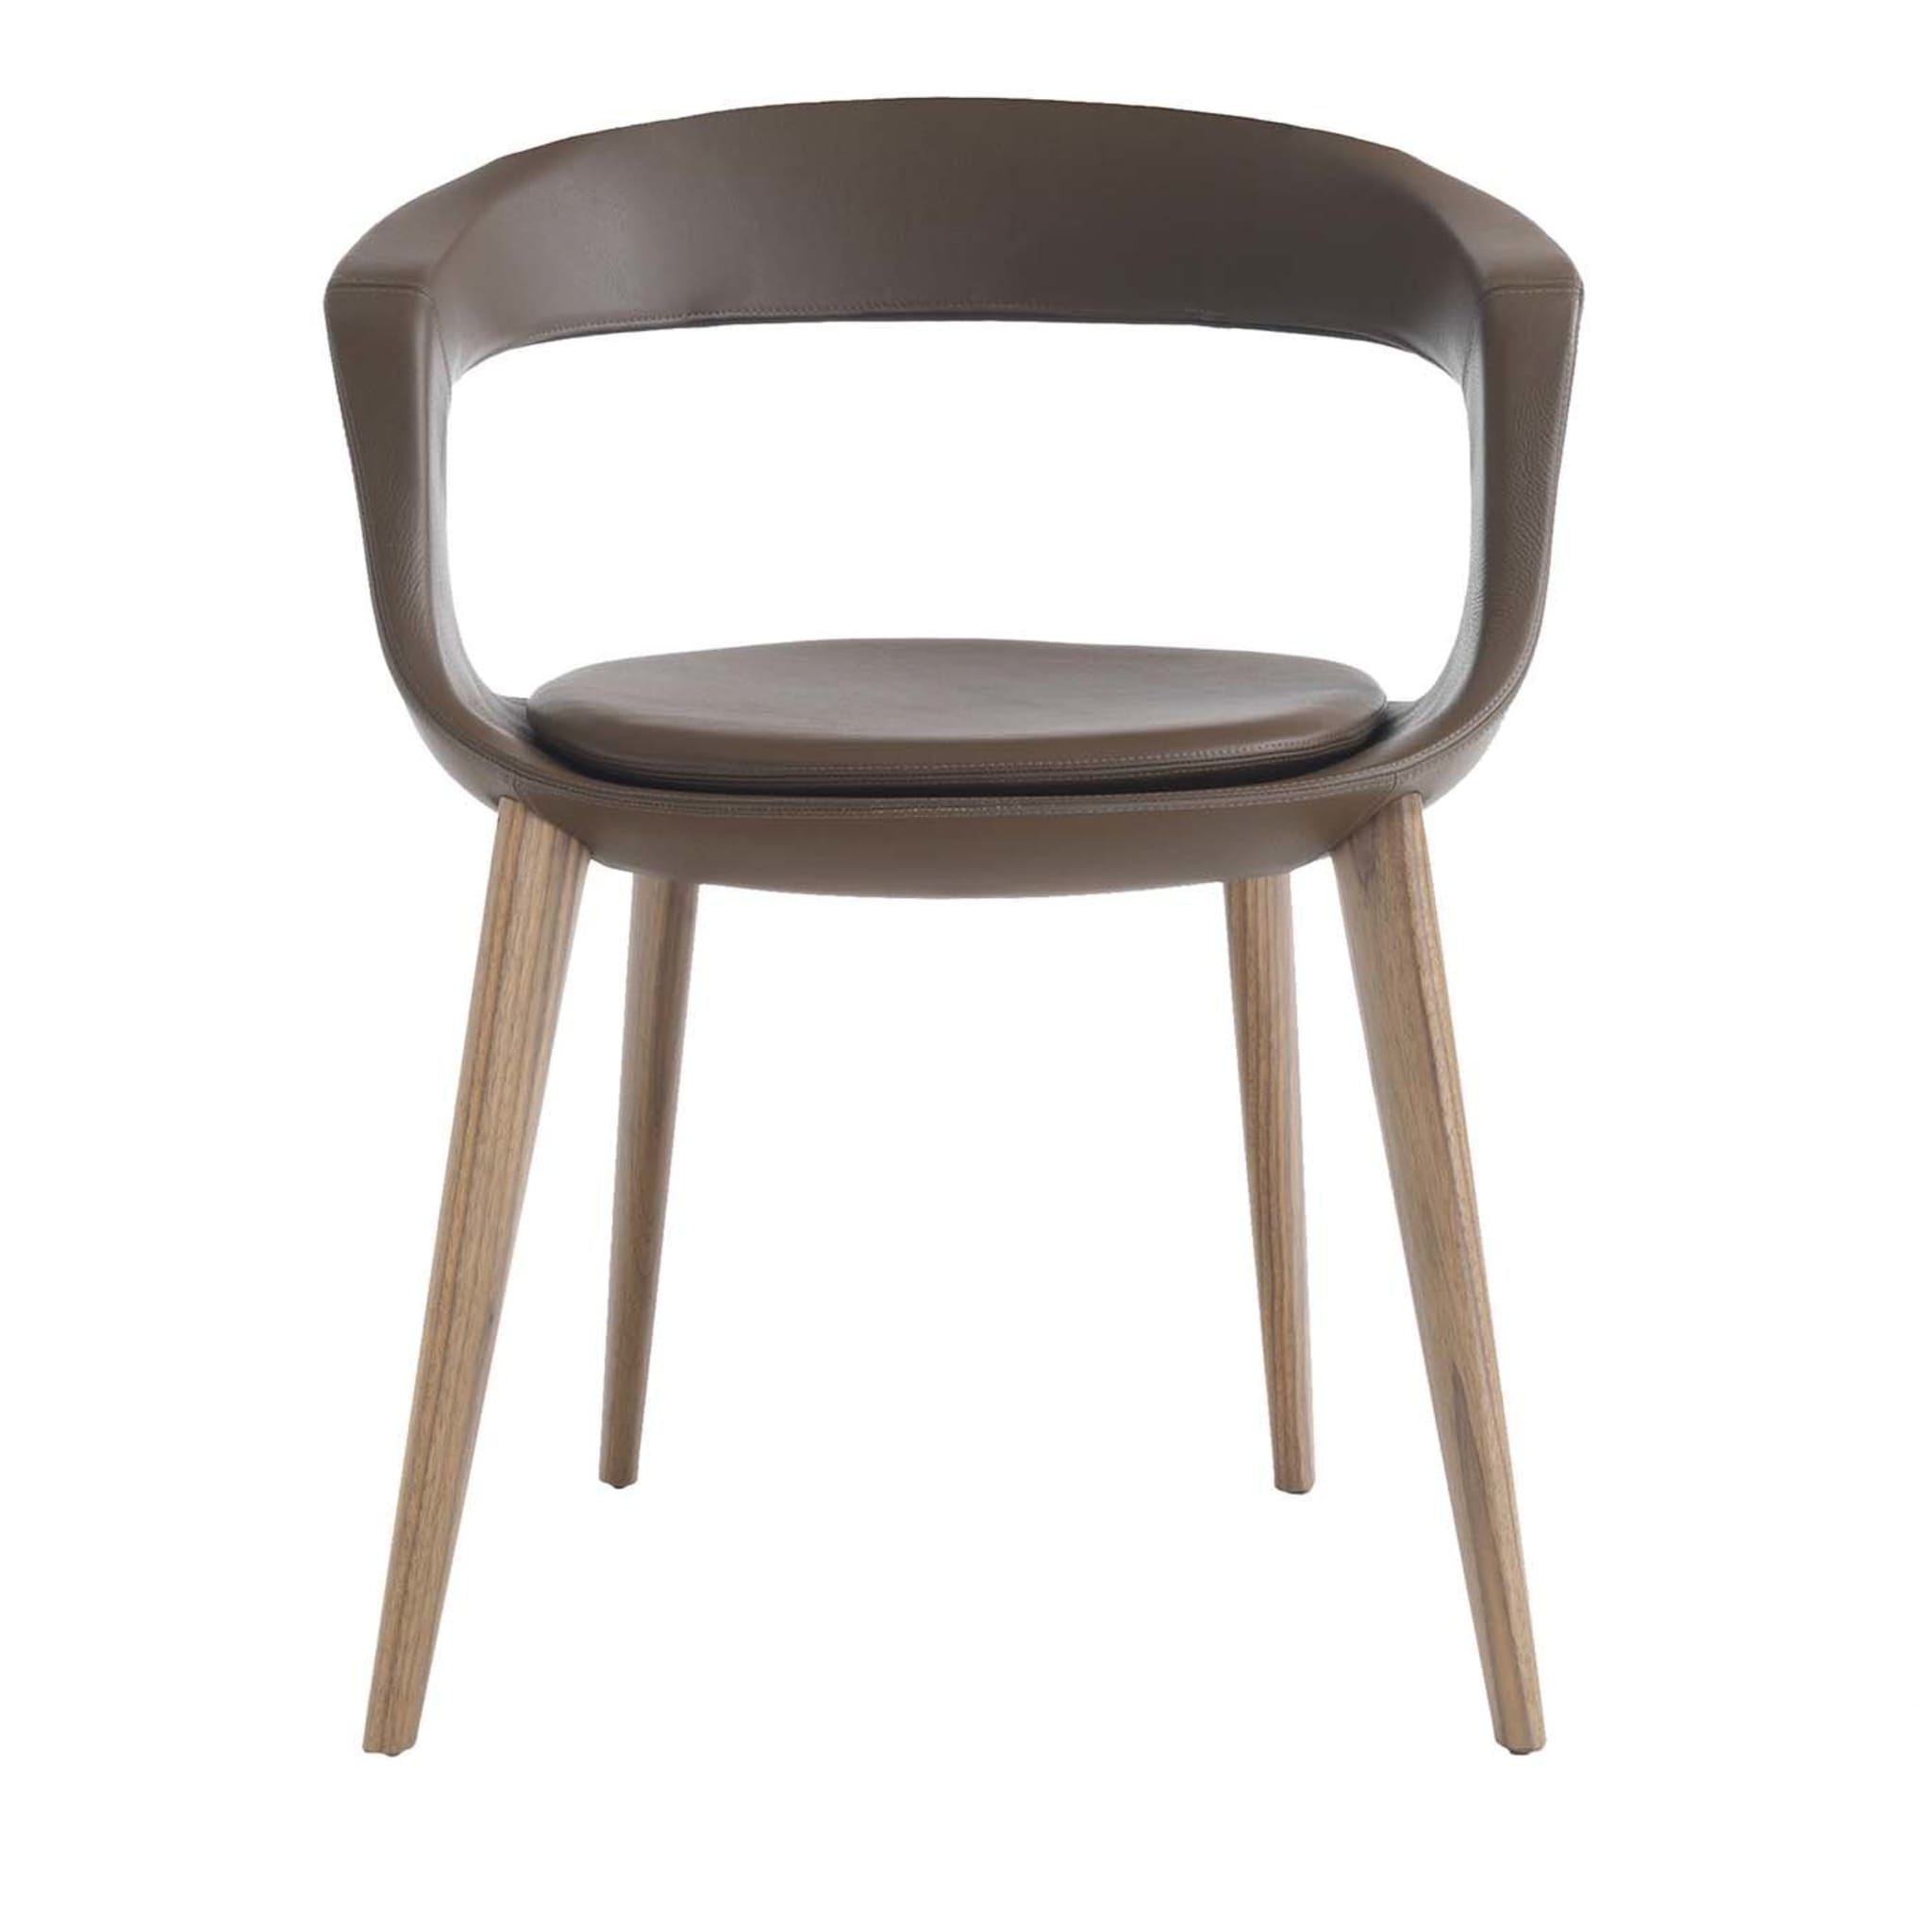 Frenchkiss Low-Backed Wooden-Legged Chair by Stefano Bigi - Main view